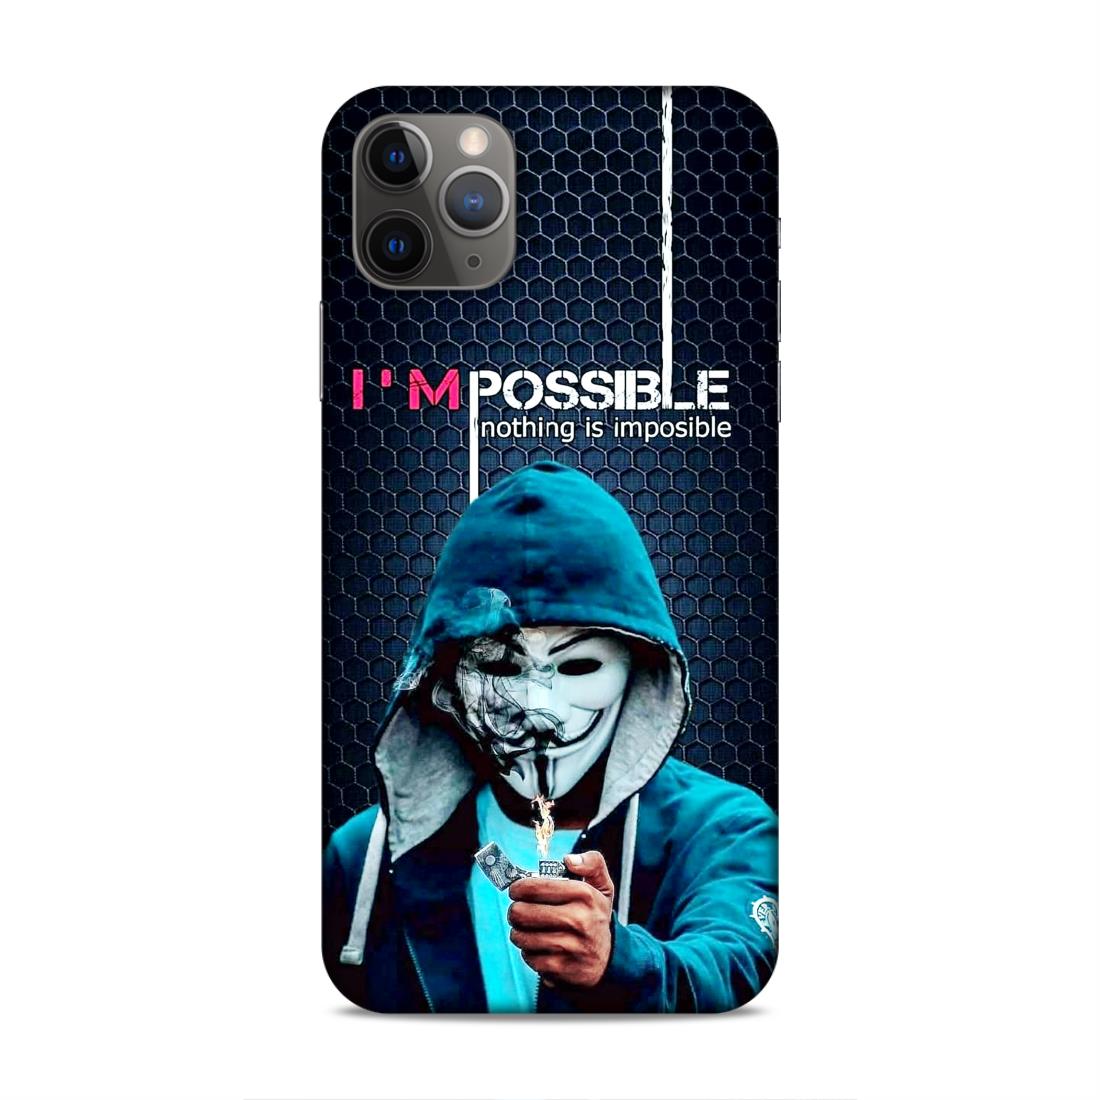 Im Possible Hard Back Case For Apple iPhone 11 Pro Max